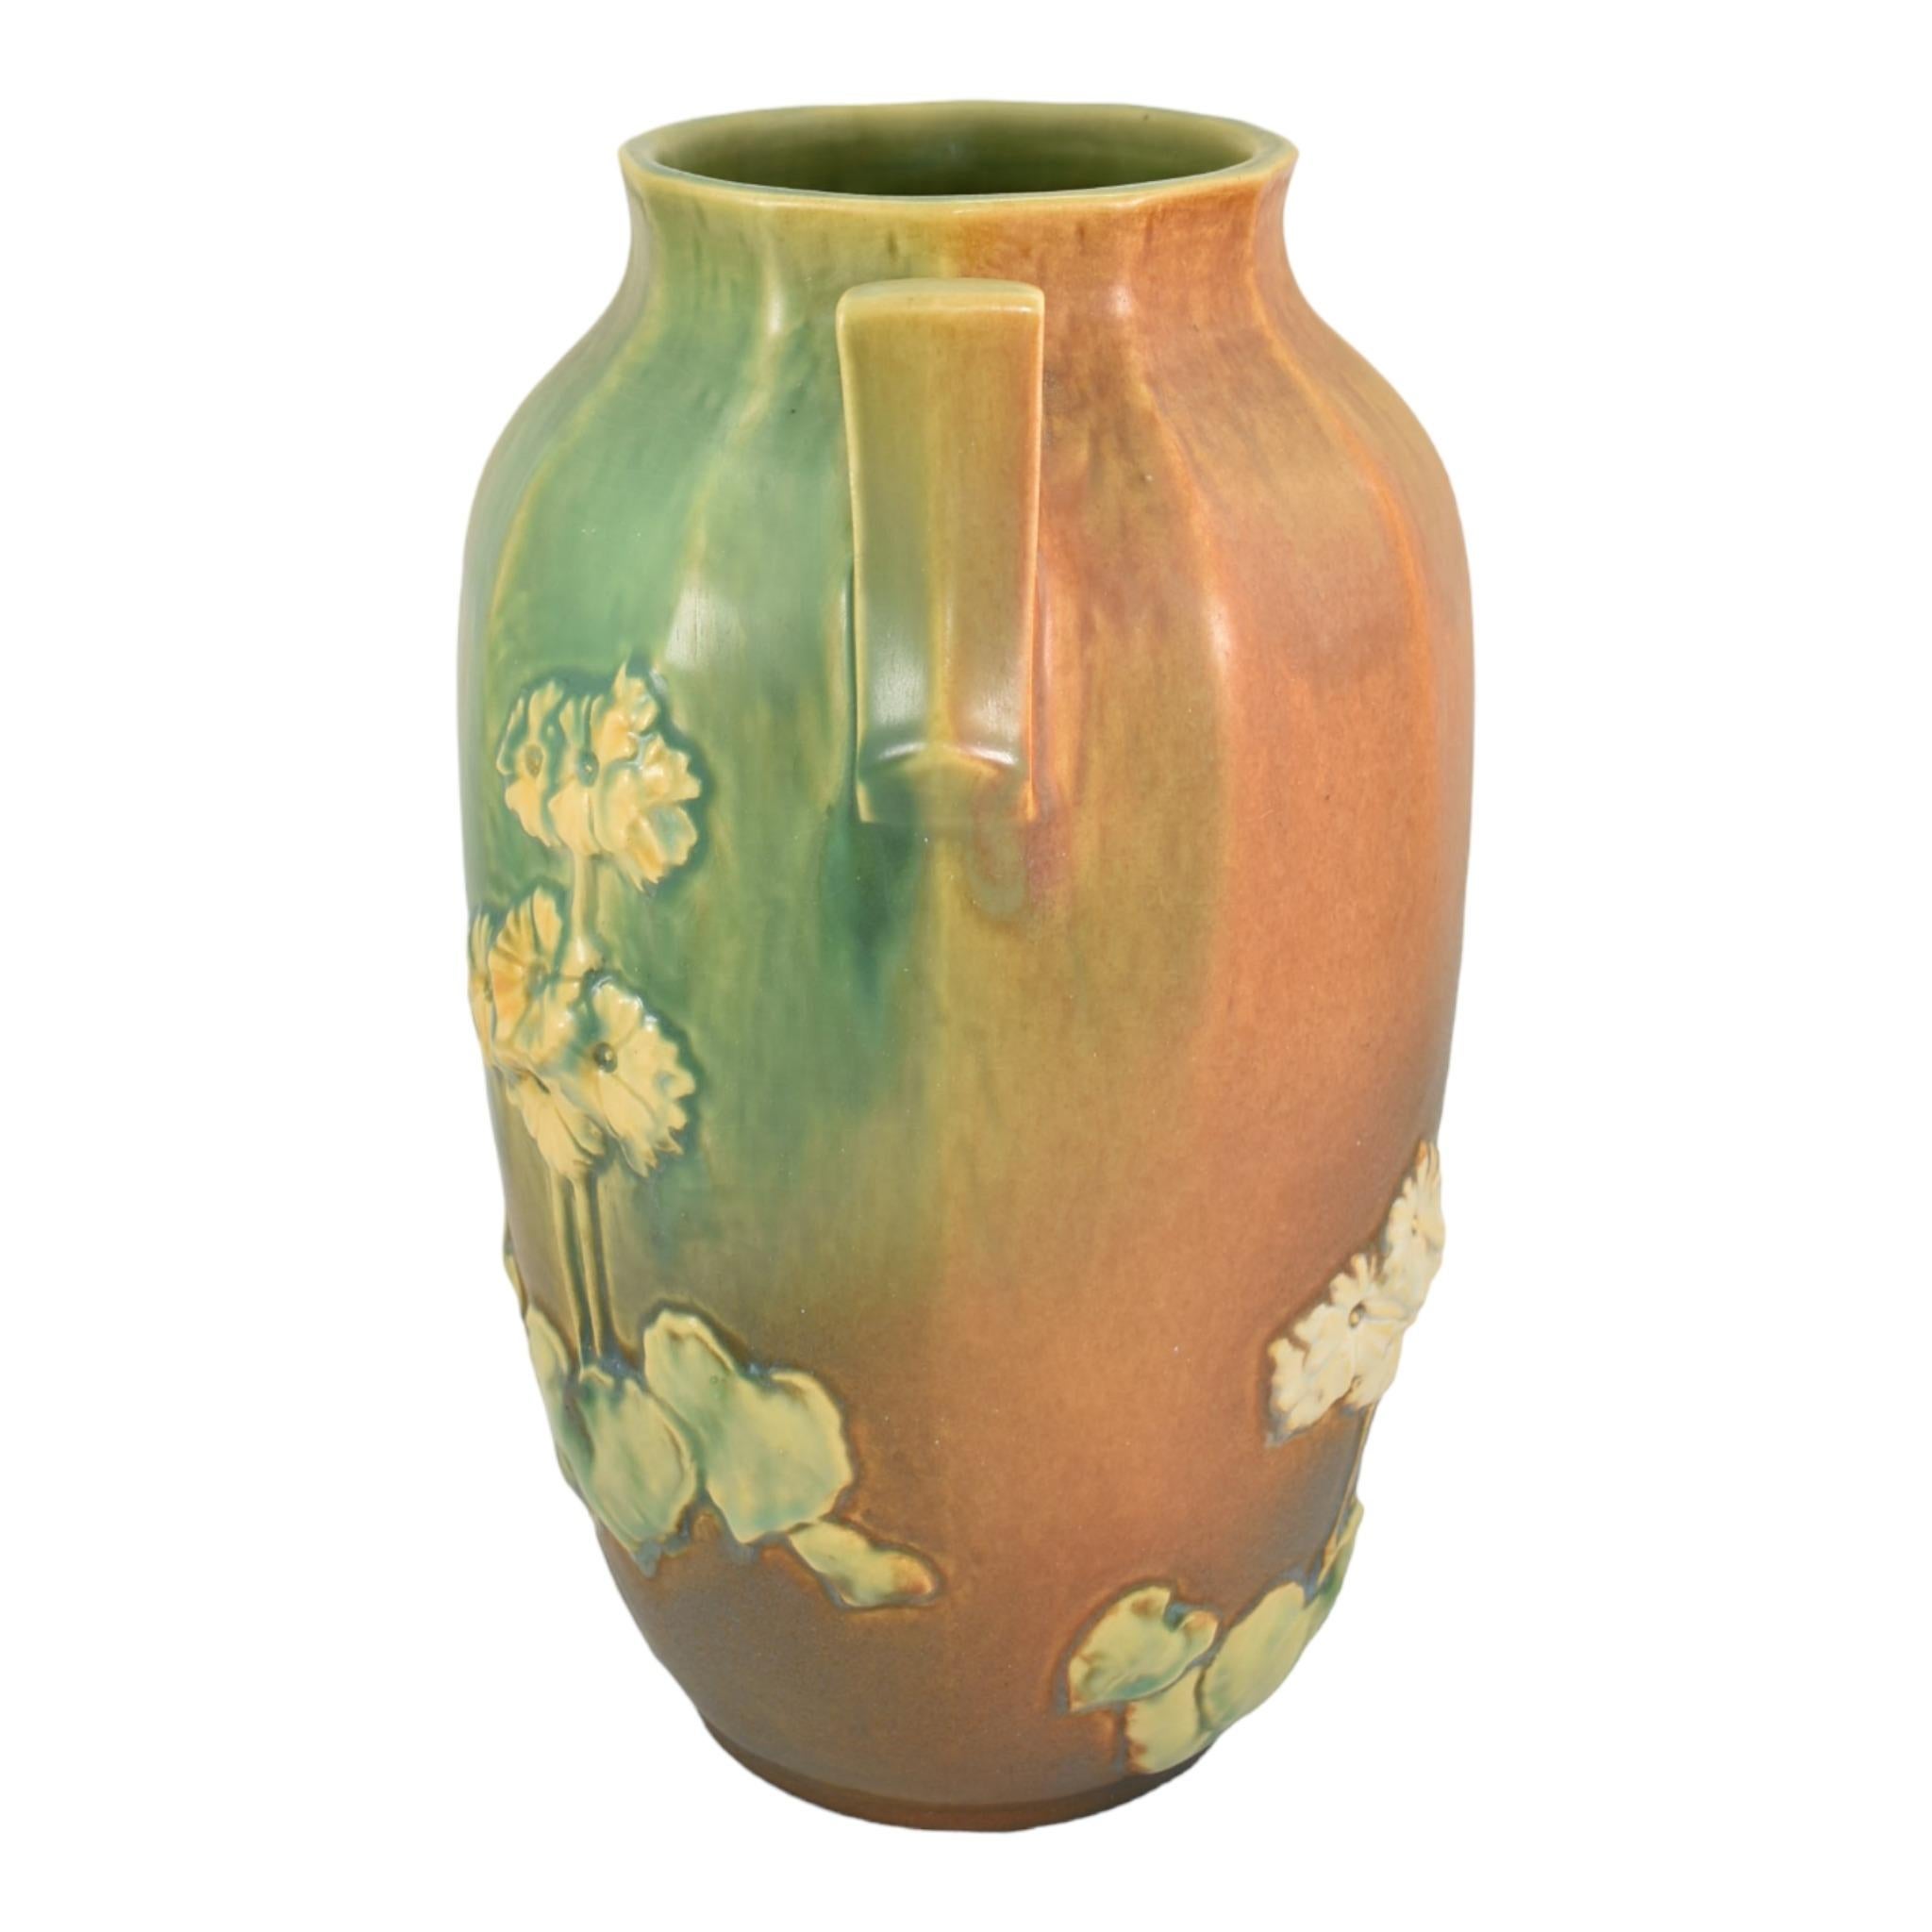 Roseville Primrose Experimental Trial Glaze 1936 Vintage Pottery Ceramic Vase
Exceptional, one of a kind Roseville experimental vase decorated with primrose flowers.
Superior mold, color and glaze.
Excellent condition. Very minor professional